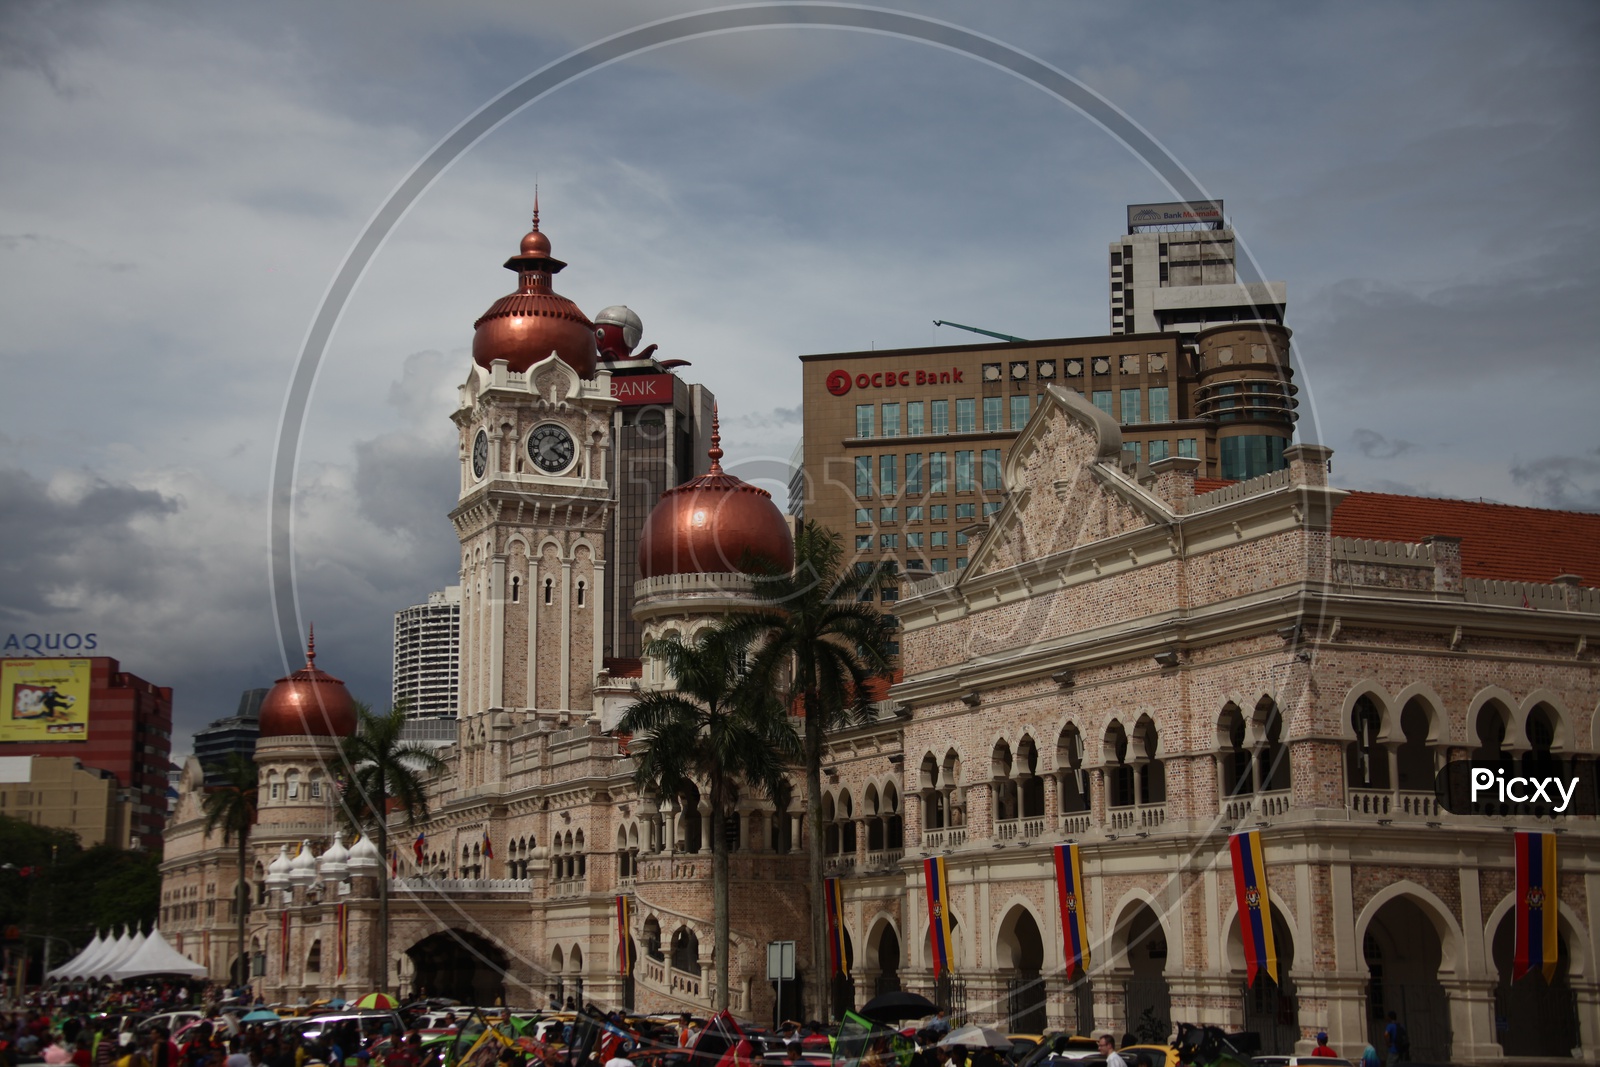 The Sultan Abdul Samad Building is a late-nineteenth century building